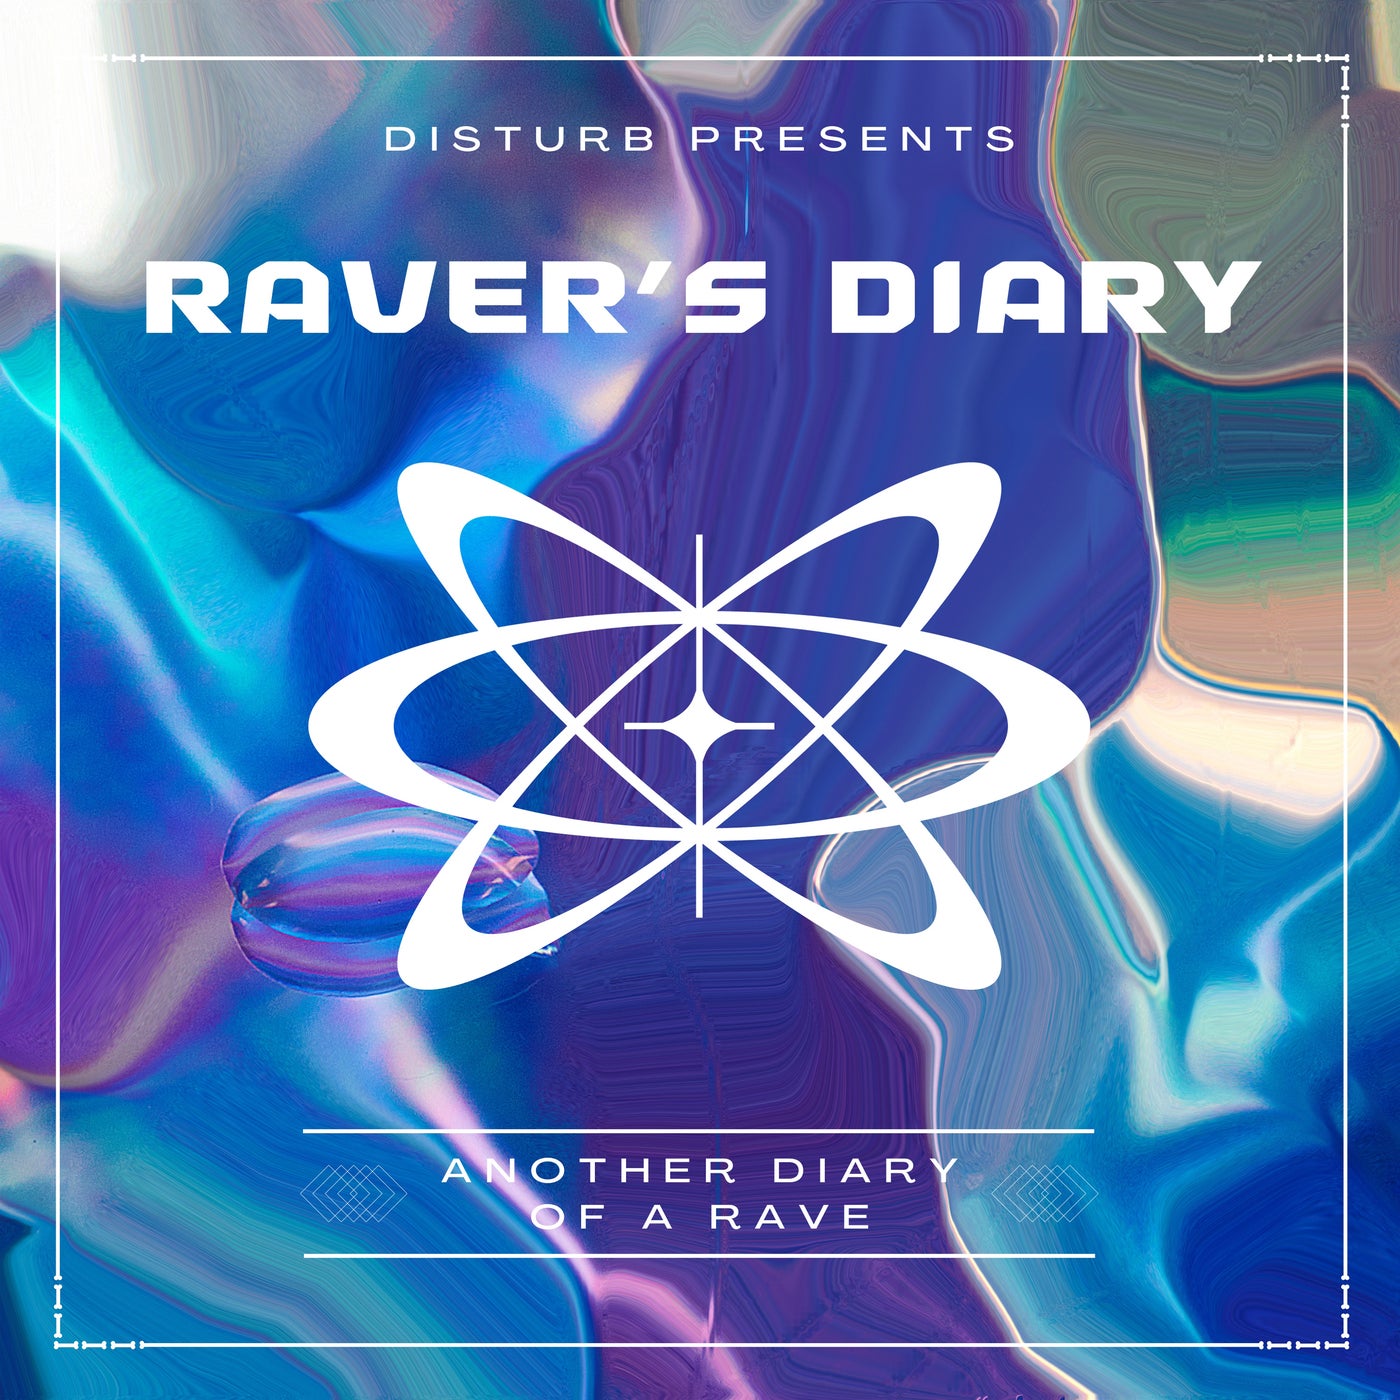 Another Diary Of A Rave